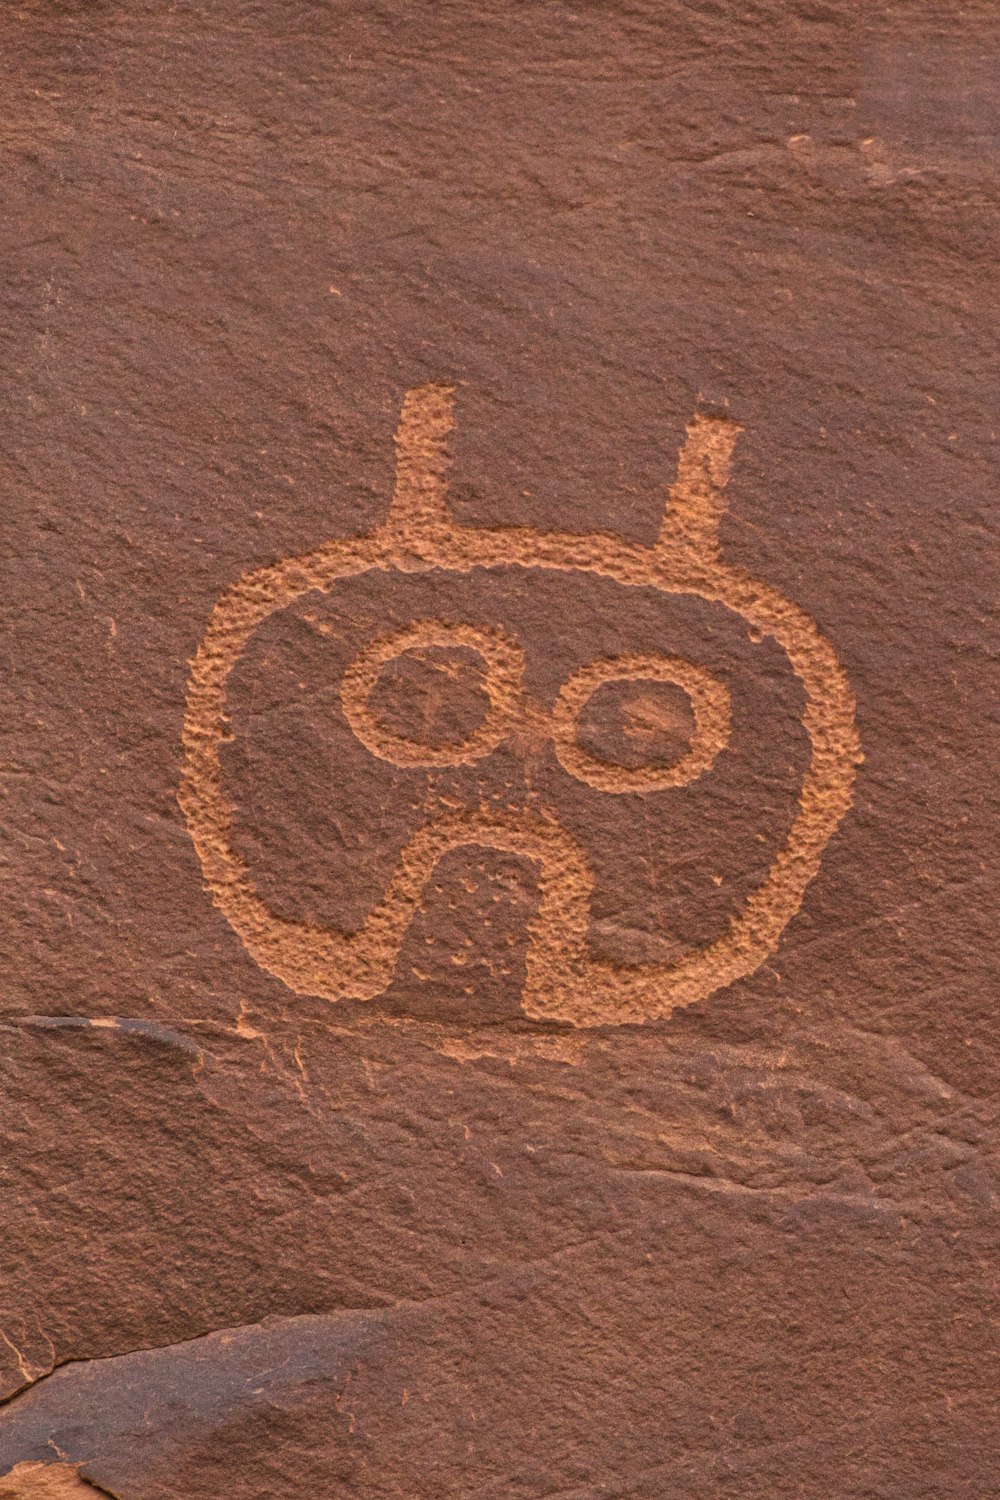 a rock with a drawing of a face on it